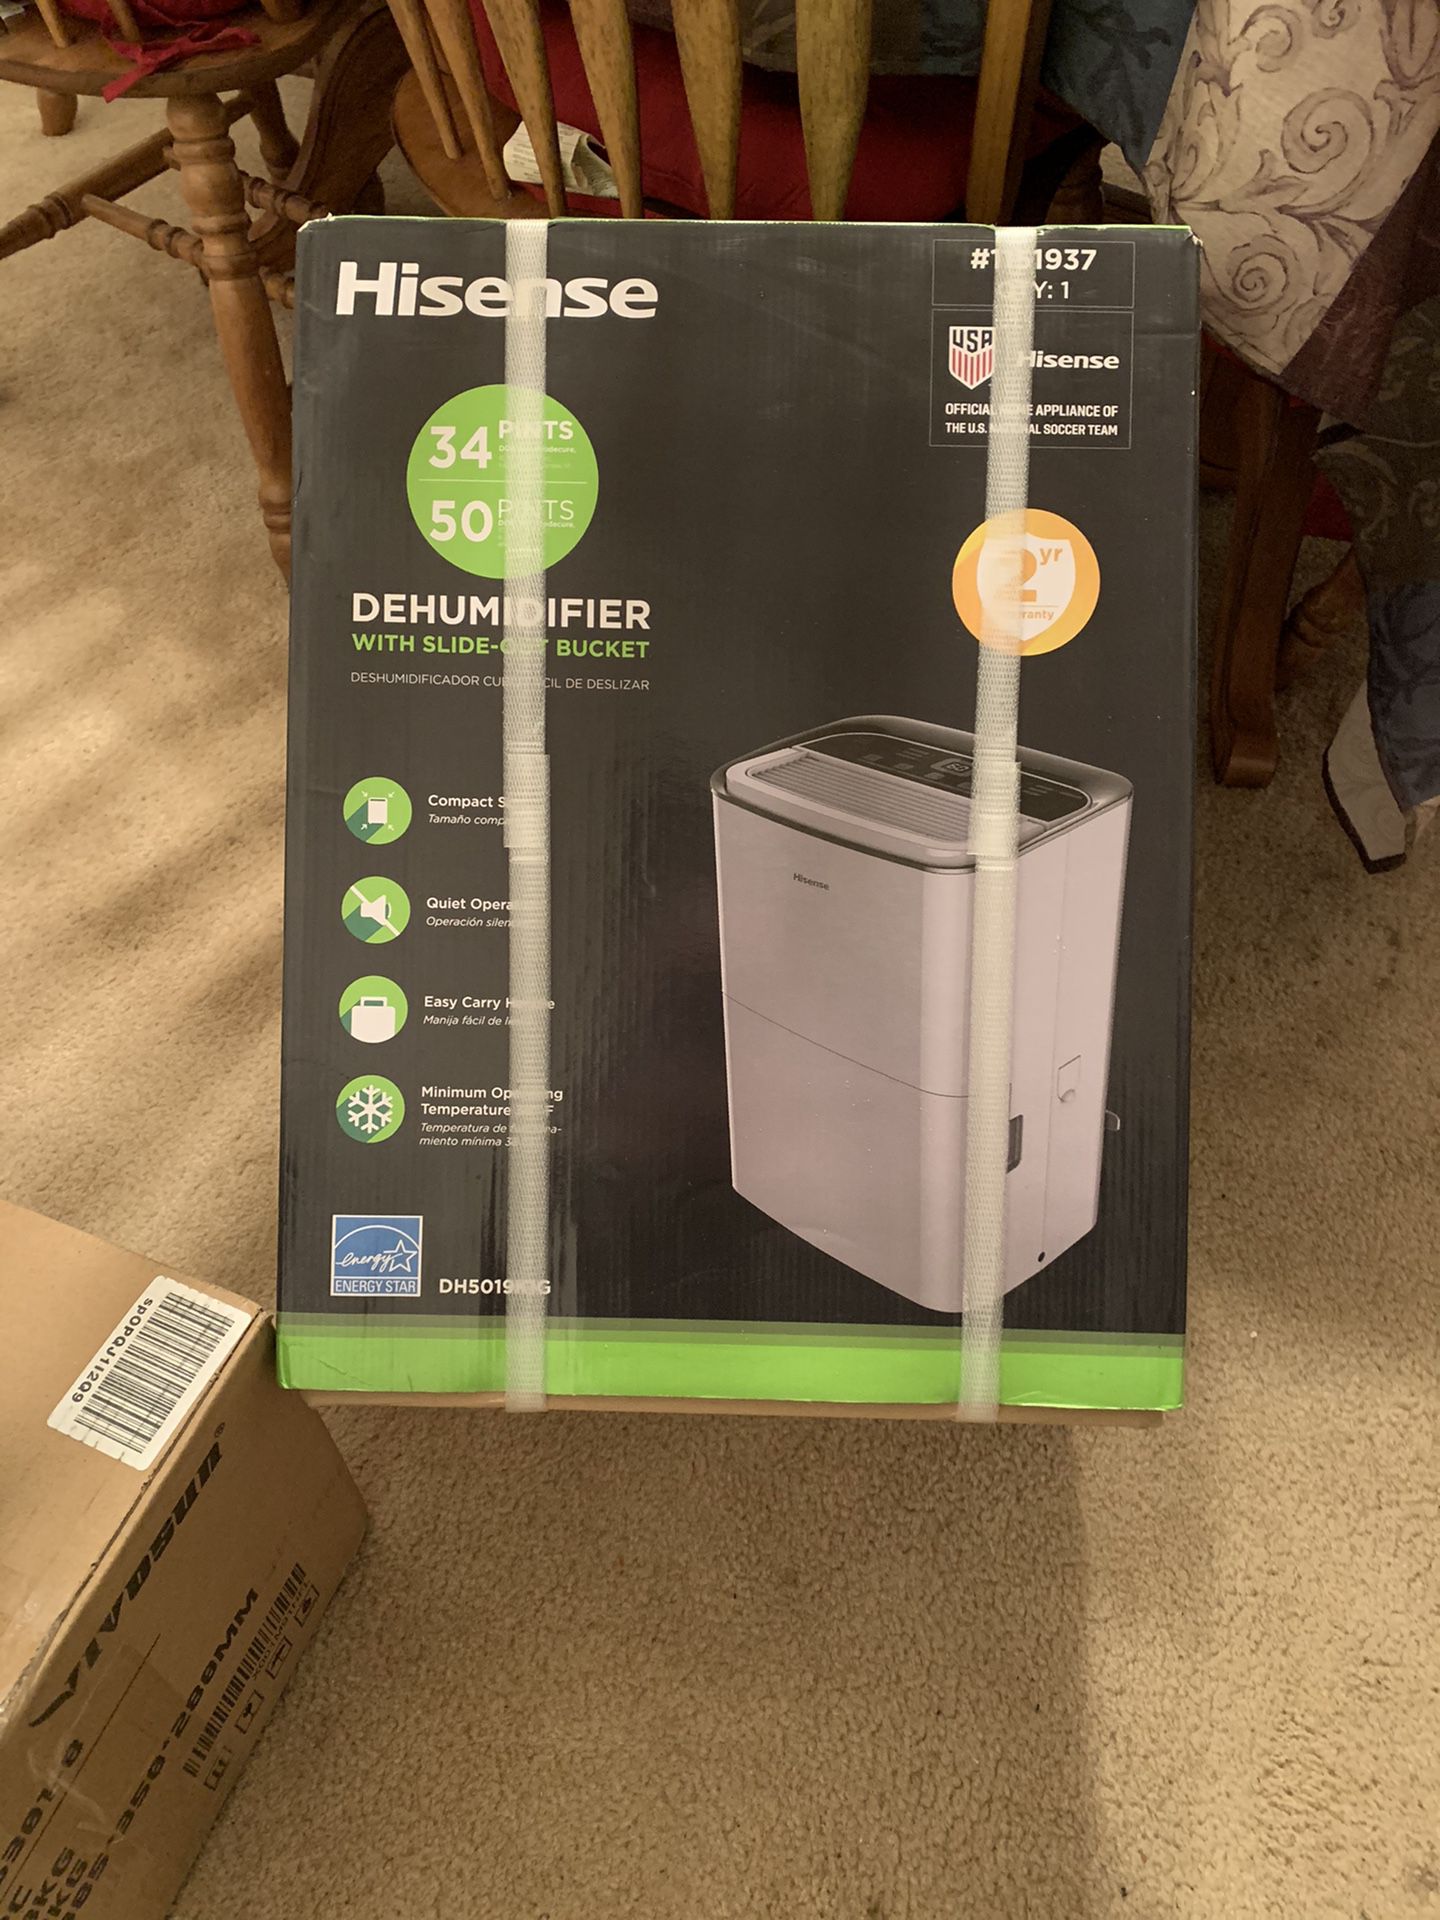 Hisense dehumidifier #50 pints.. with slide out bucket& optional drain line hook up..